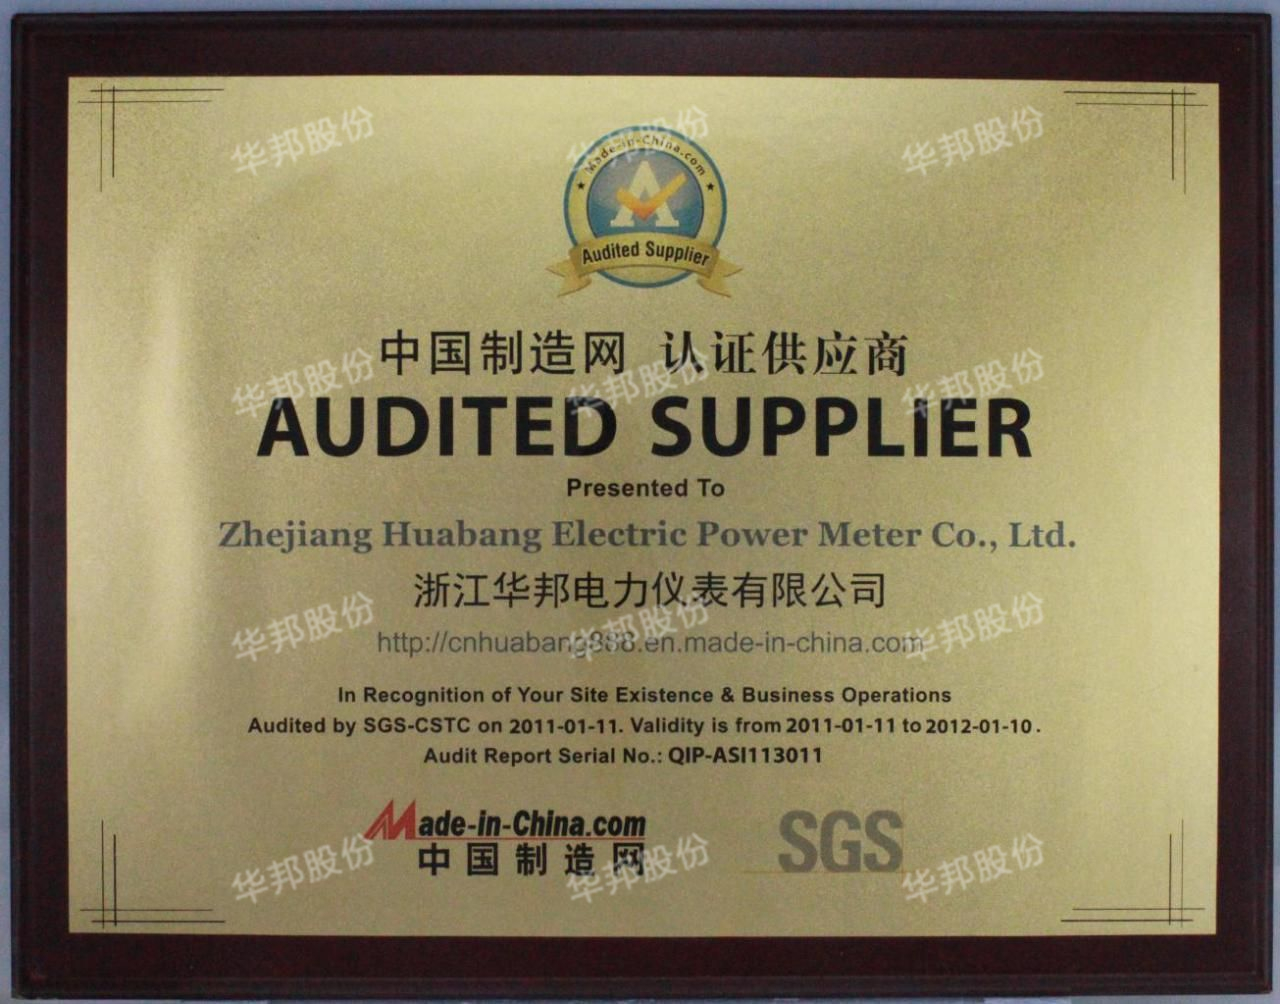 China manufacturing network certification provider